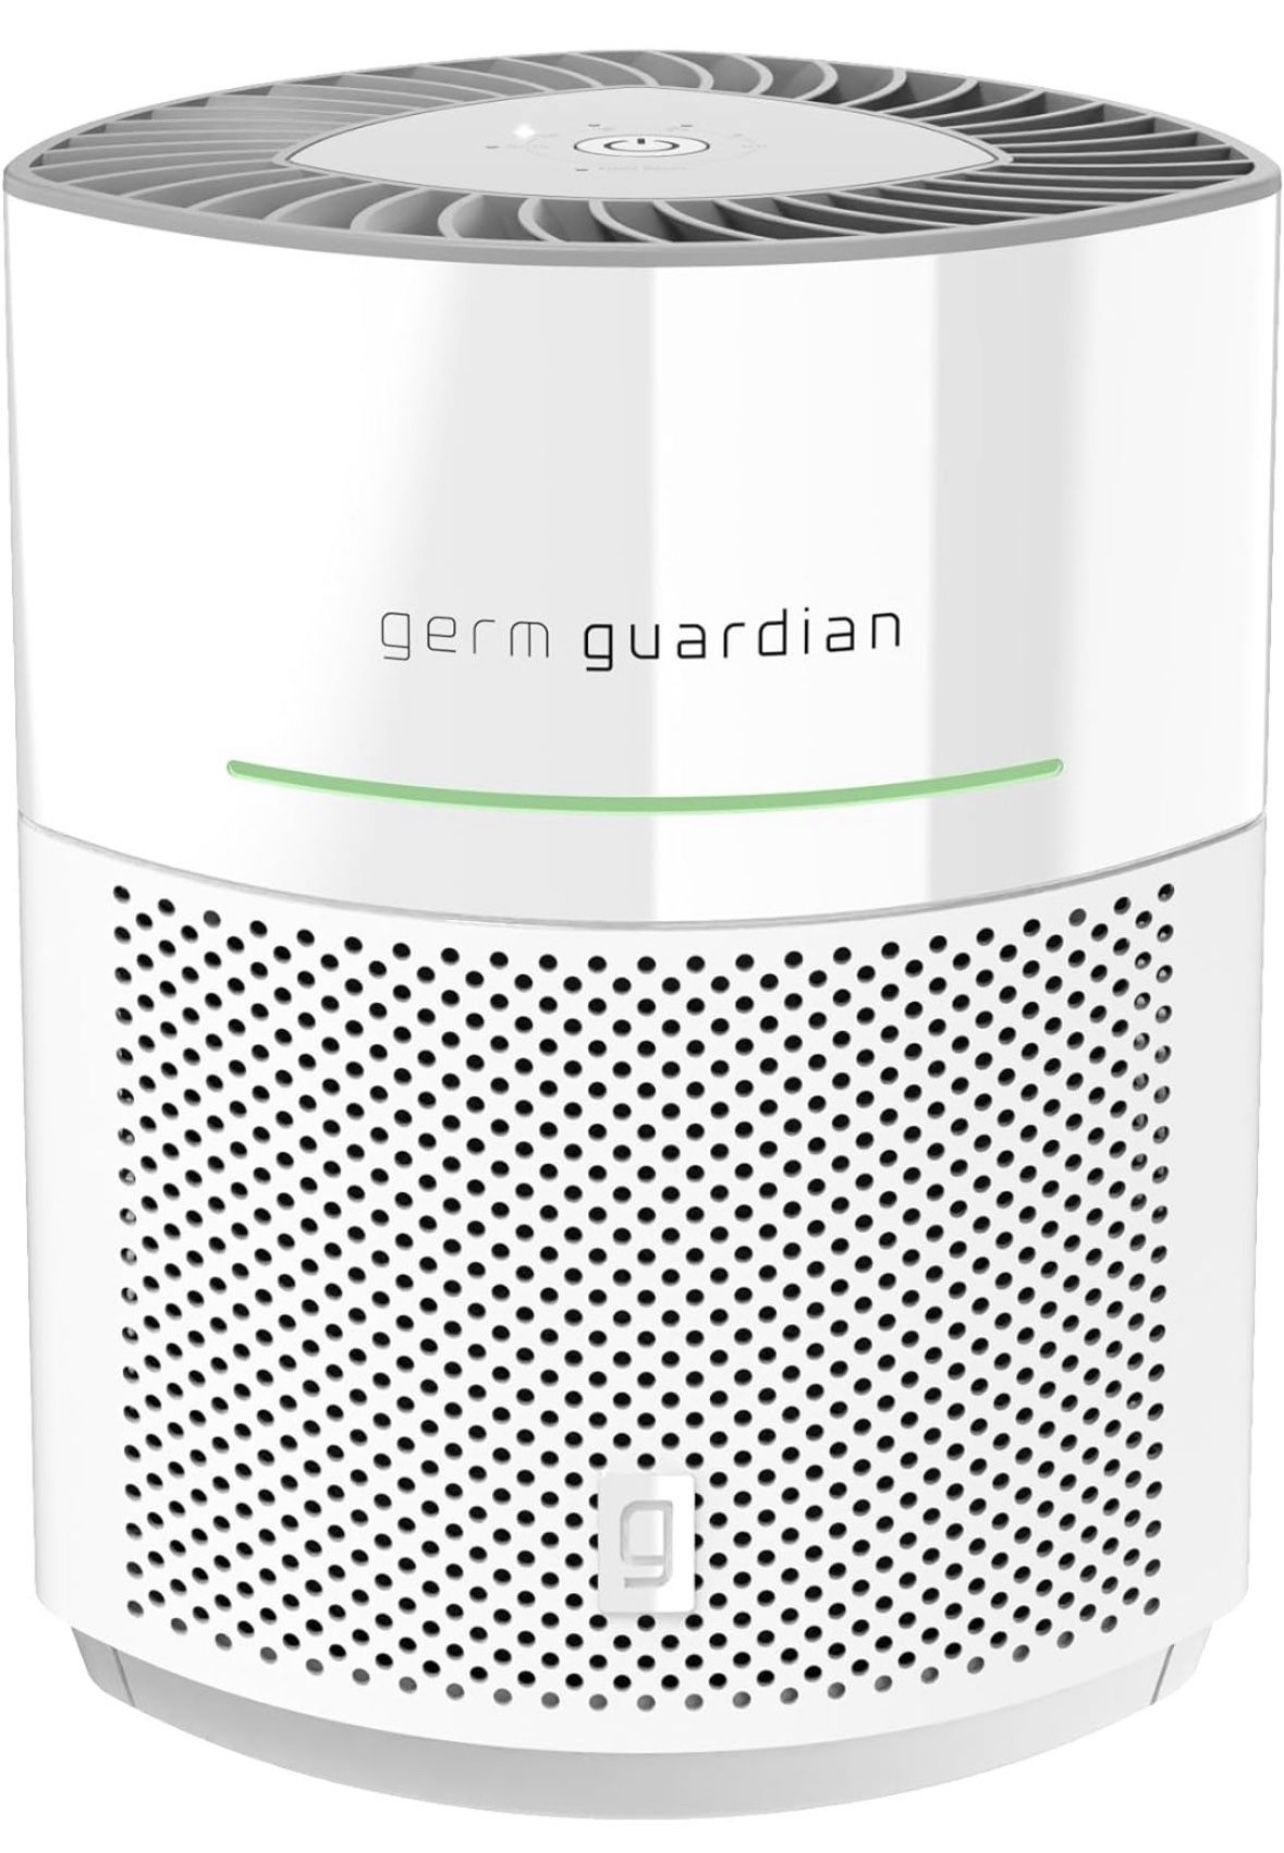 GermGuardian Airsafe Intelligent Air Purifier, Air Quality Sensor, 360° HEPA Filter, Large Room up to 1040 Sq. Ft., Captures 99.97% of Pollutants, Wil